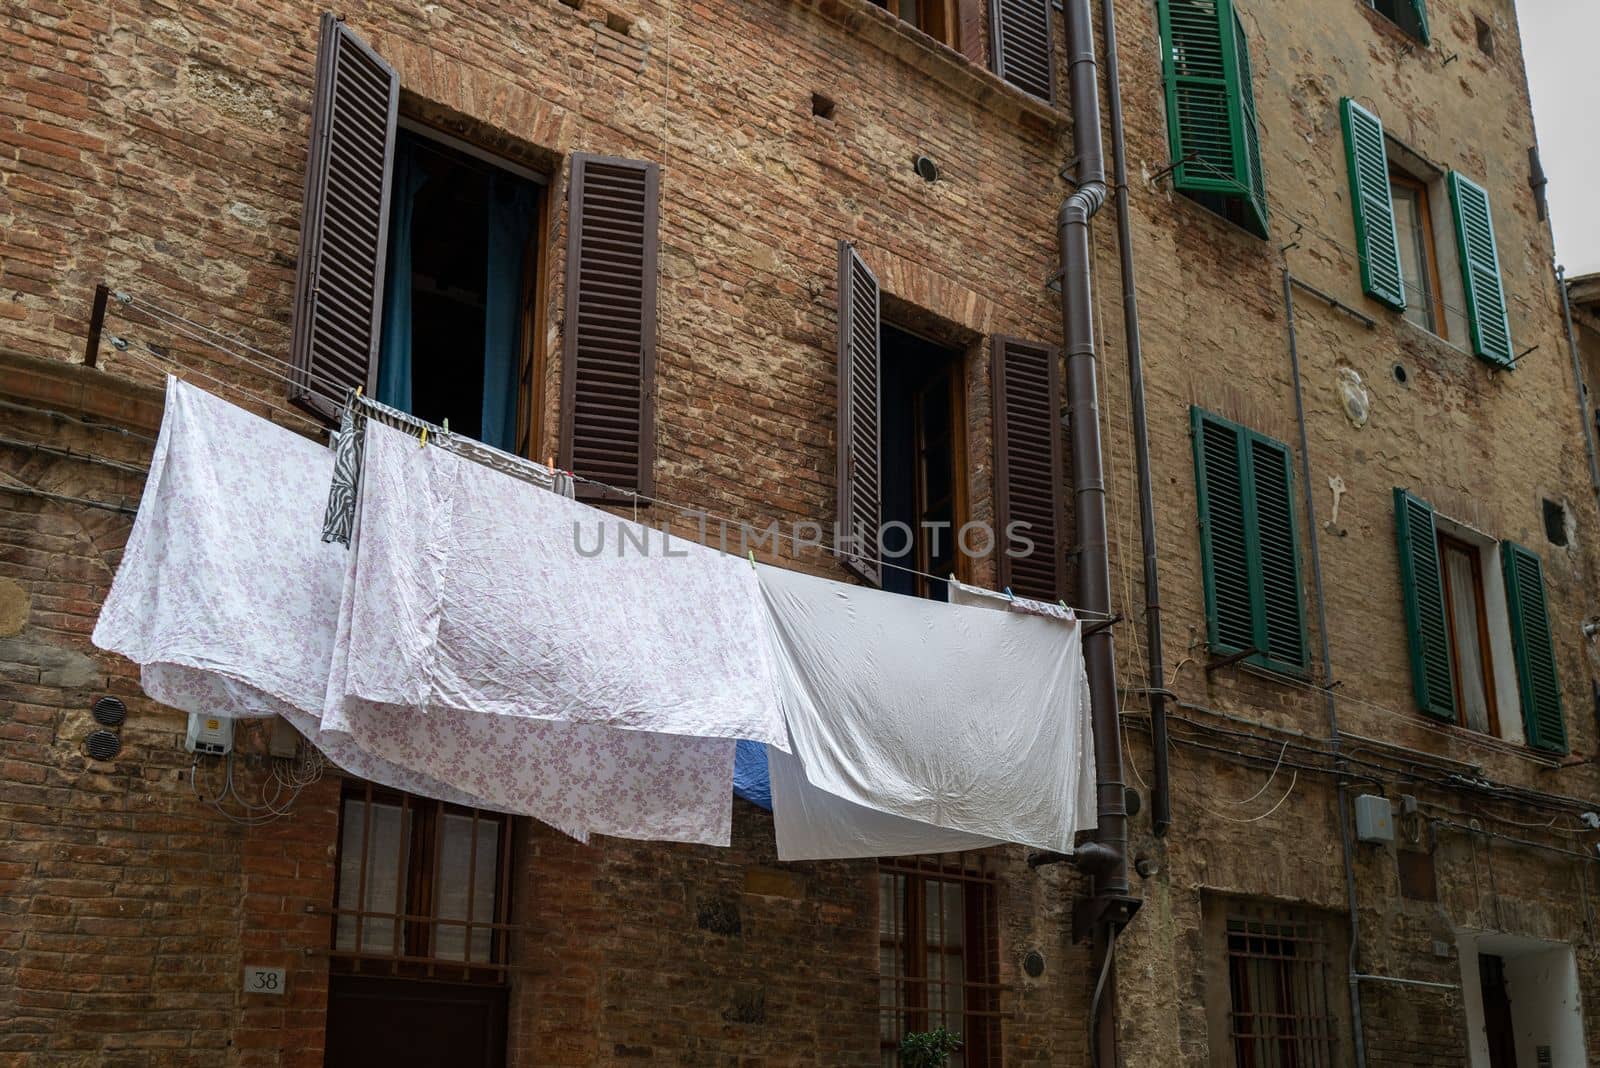 Laundry for drying is hung on the facade of an old building.